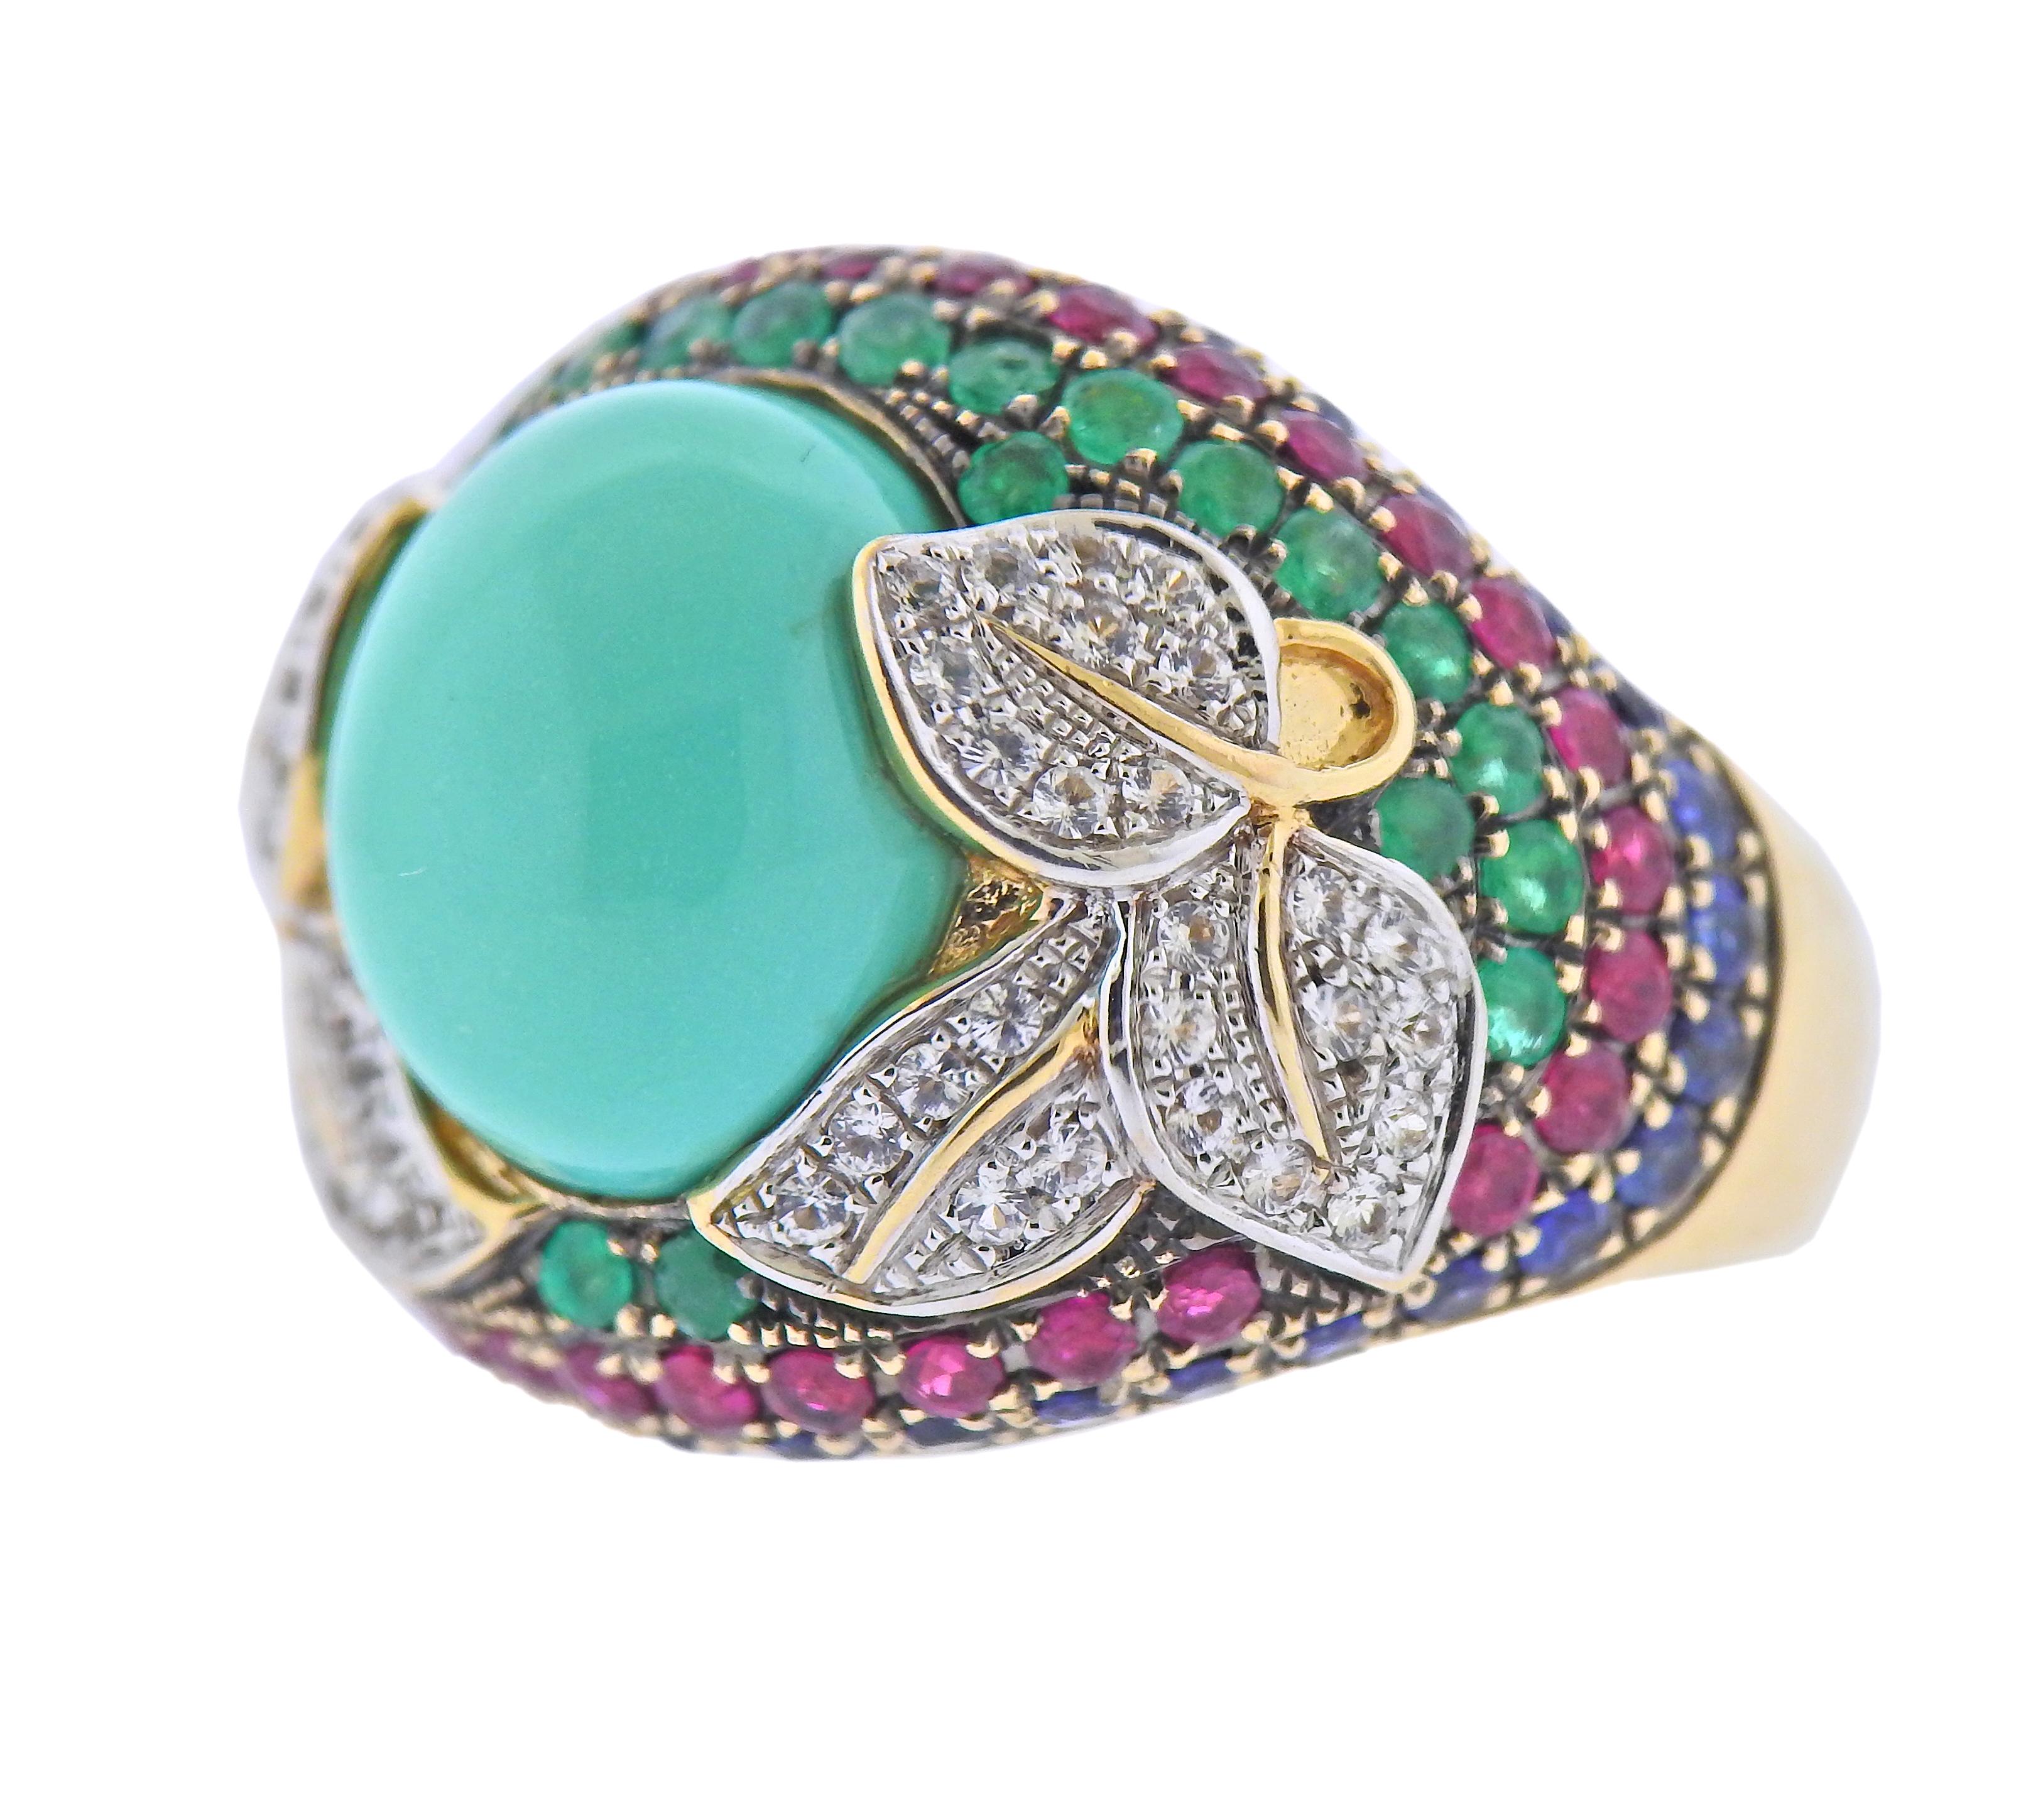 14k gold cocktail ring, featuring sapphires, emeralds, rubies, diamonds and center turquoise. Ring size - 4.5, ring top is 18mm wide. Marked 14k, China FP. Weight - 11.4 grams.